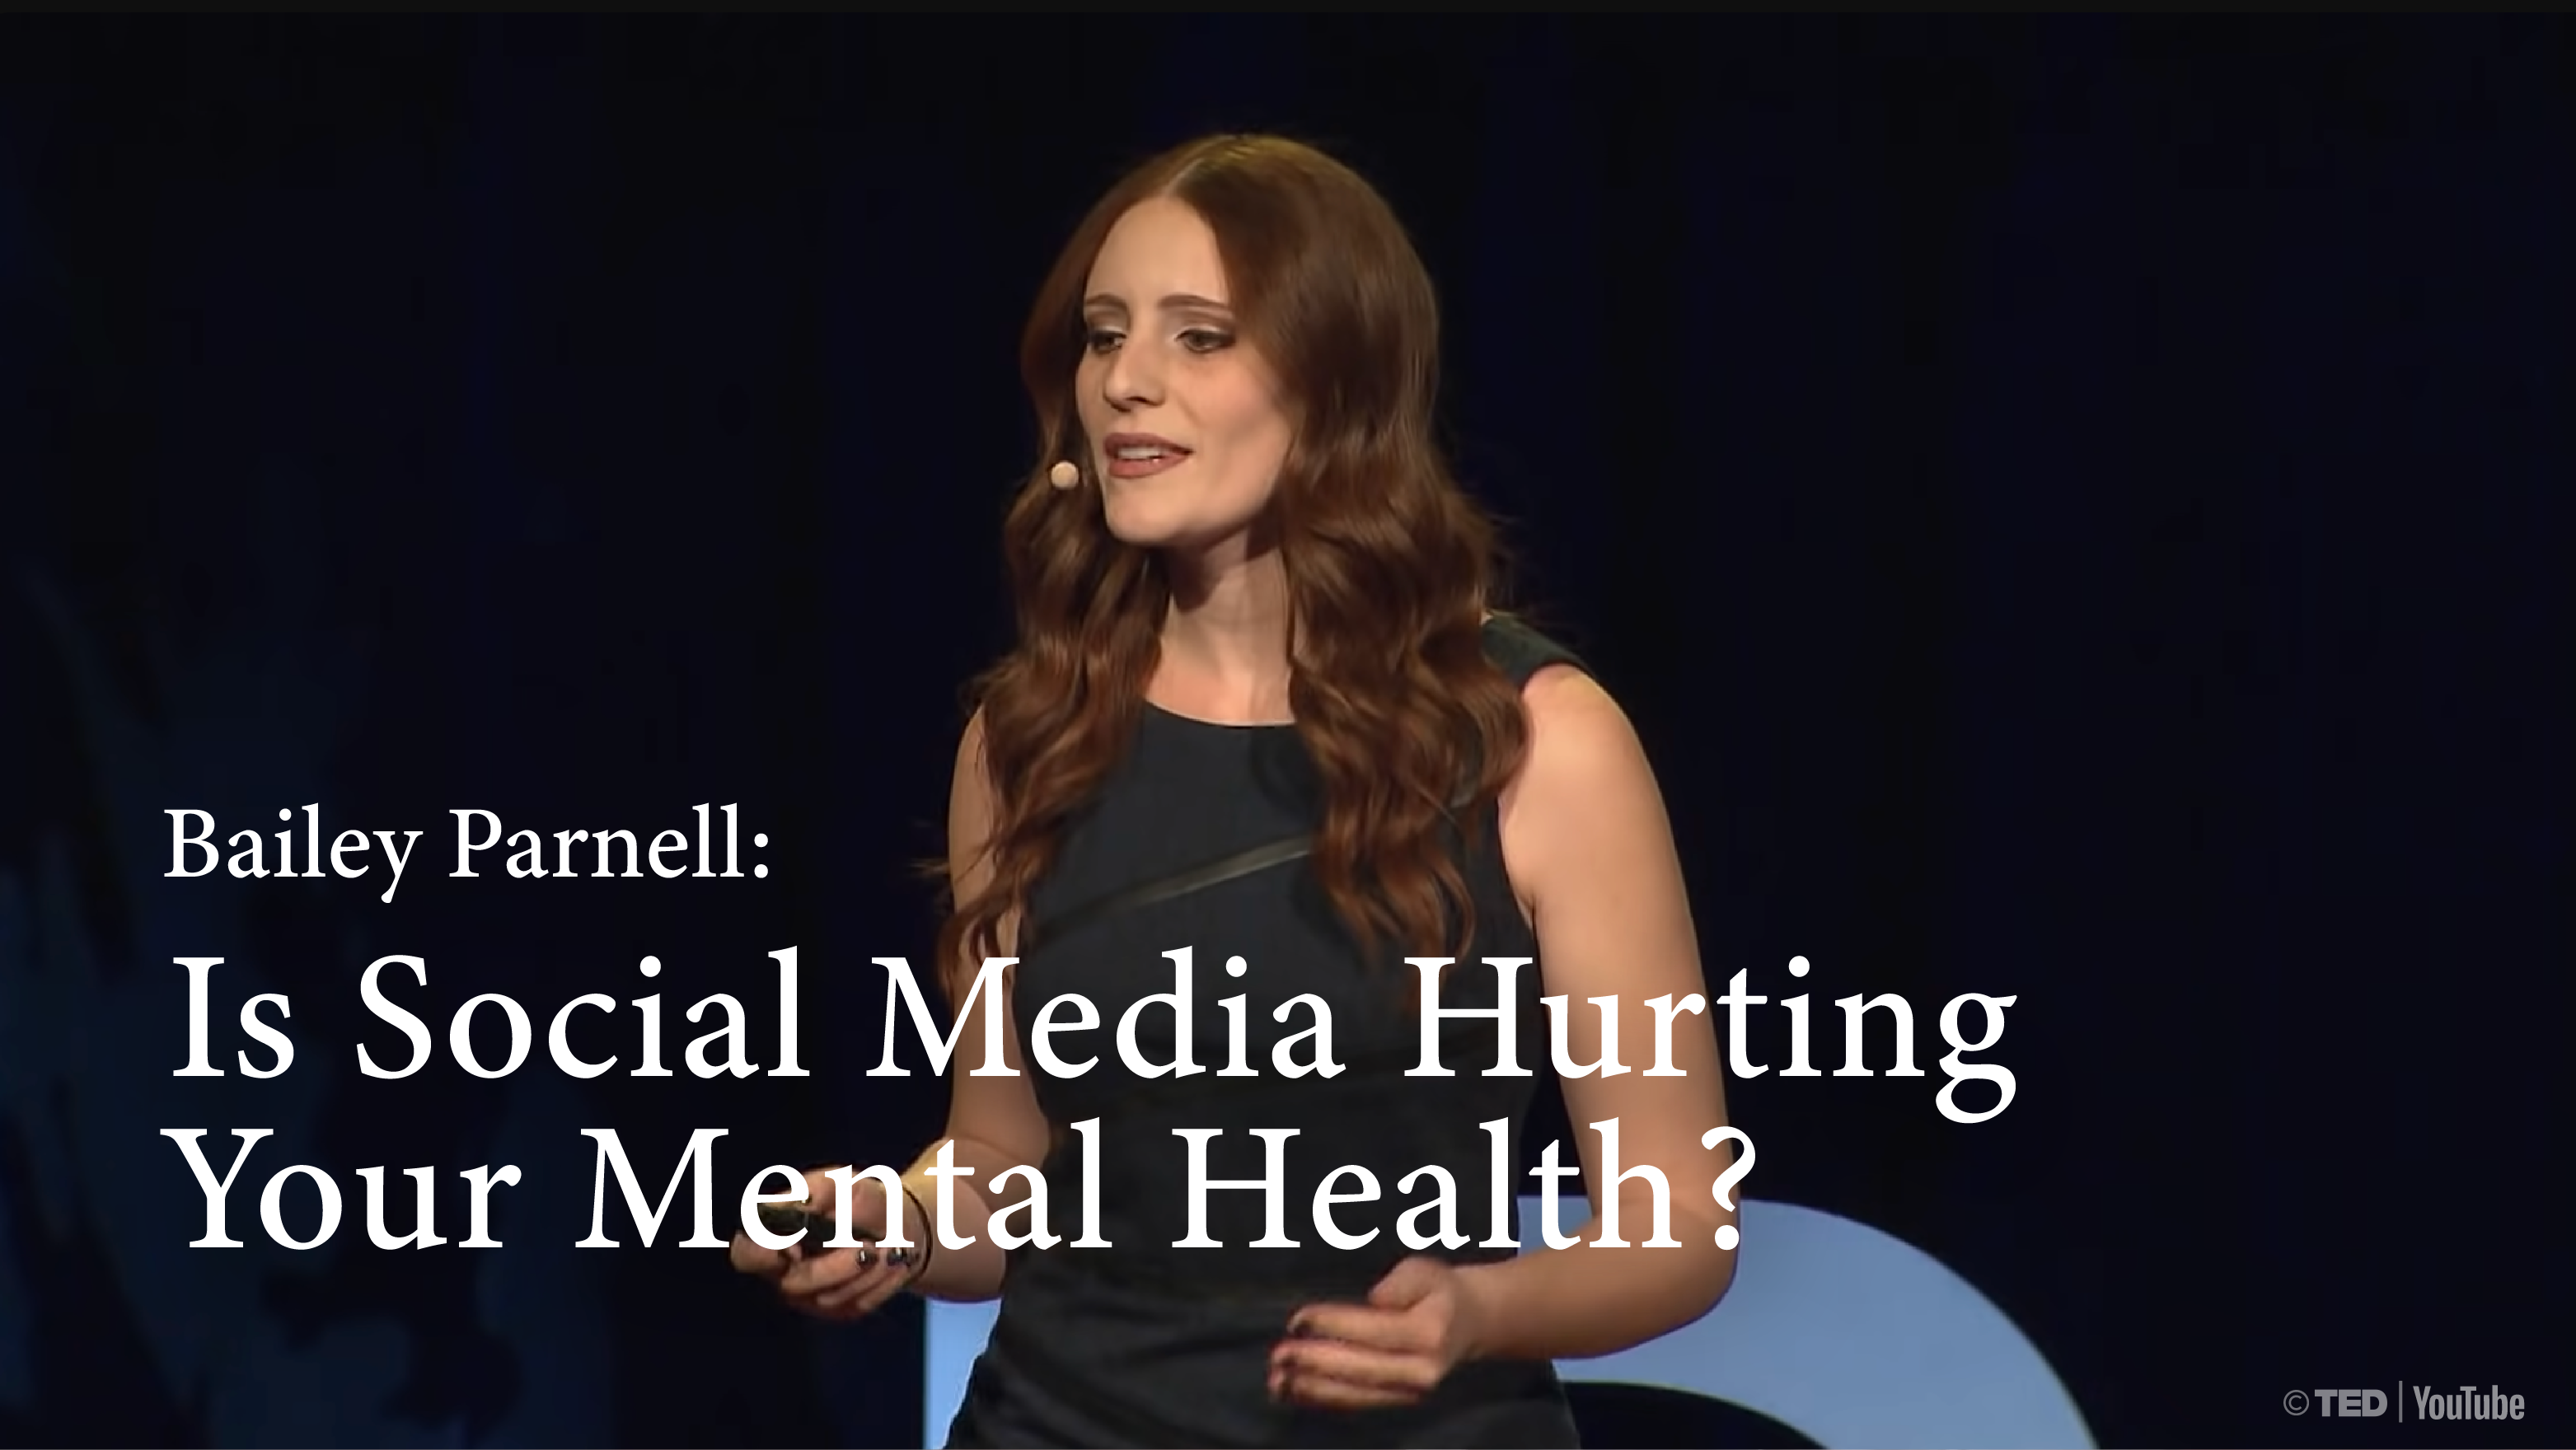 [C+] Is Social Media Hurting Your Mental Health? | Bailey Parnell [FULL]